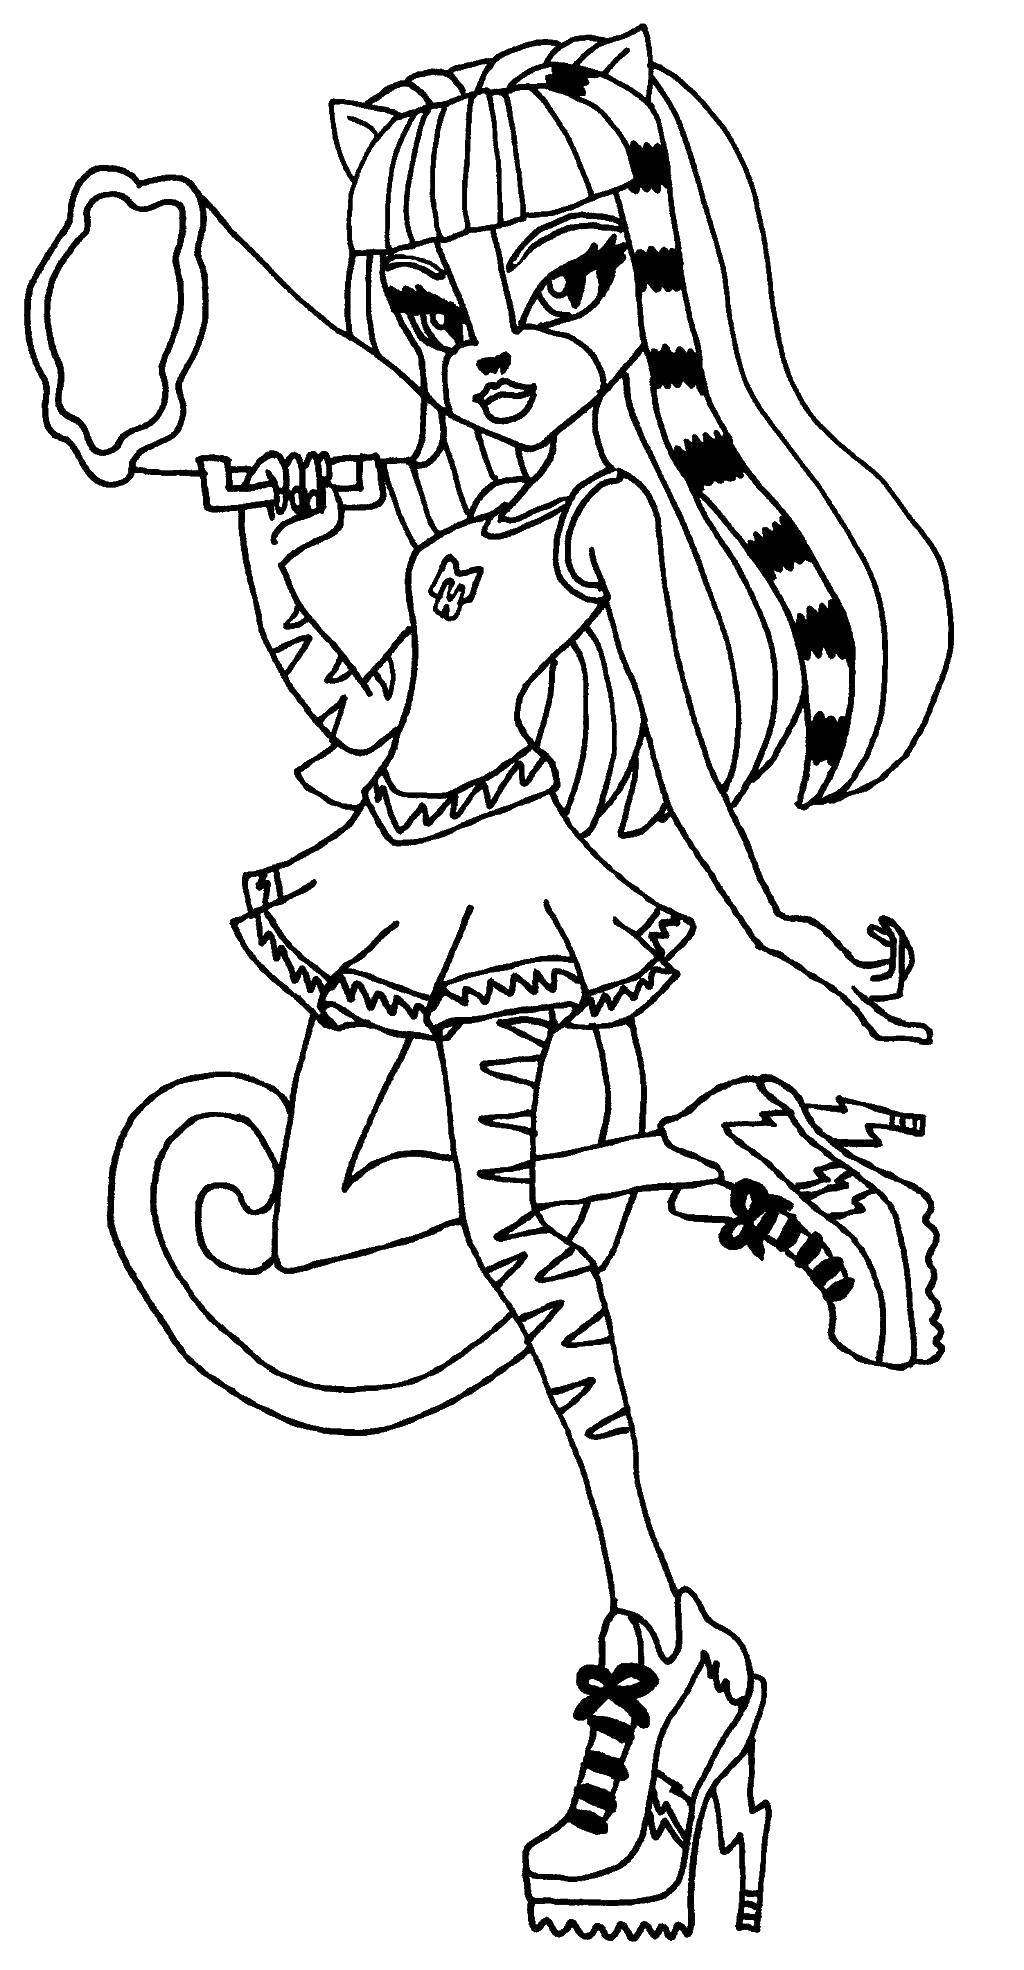 Coloring Kitty cheerleader. Category monster high. Tags:  Monster High.